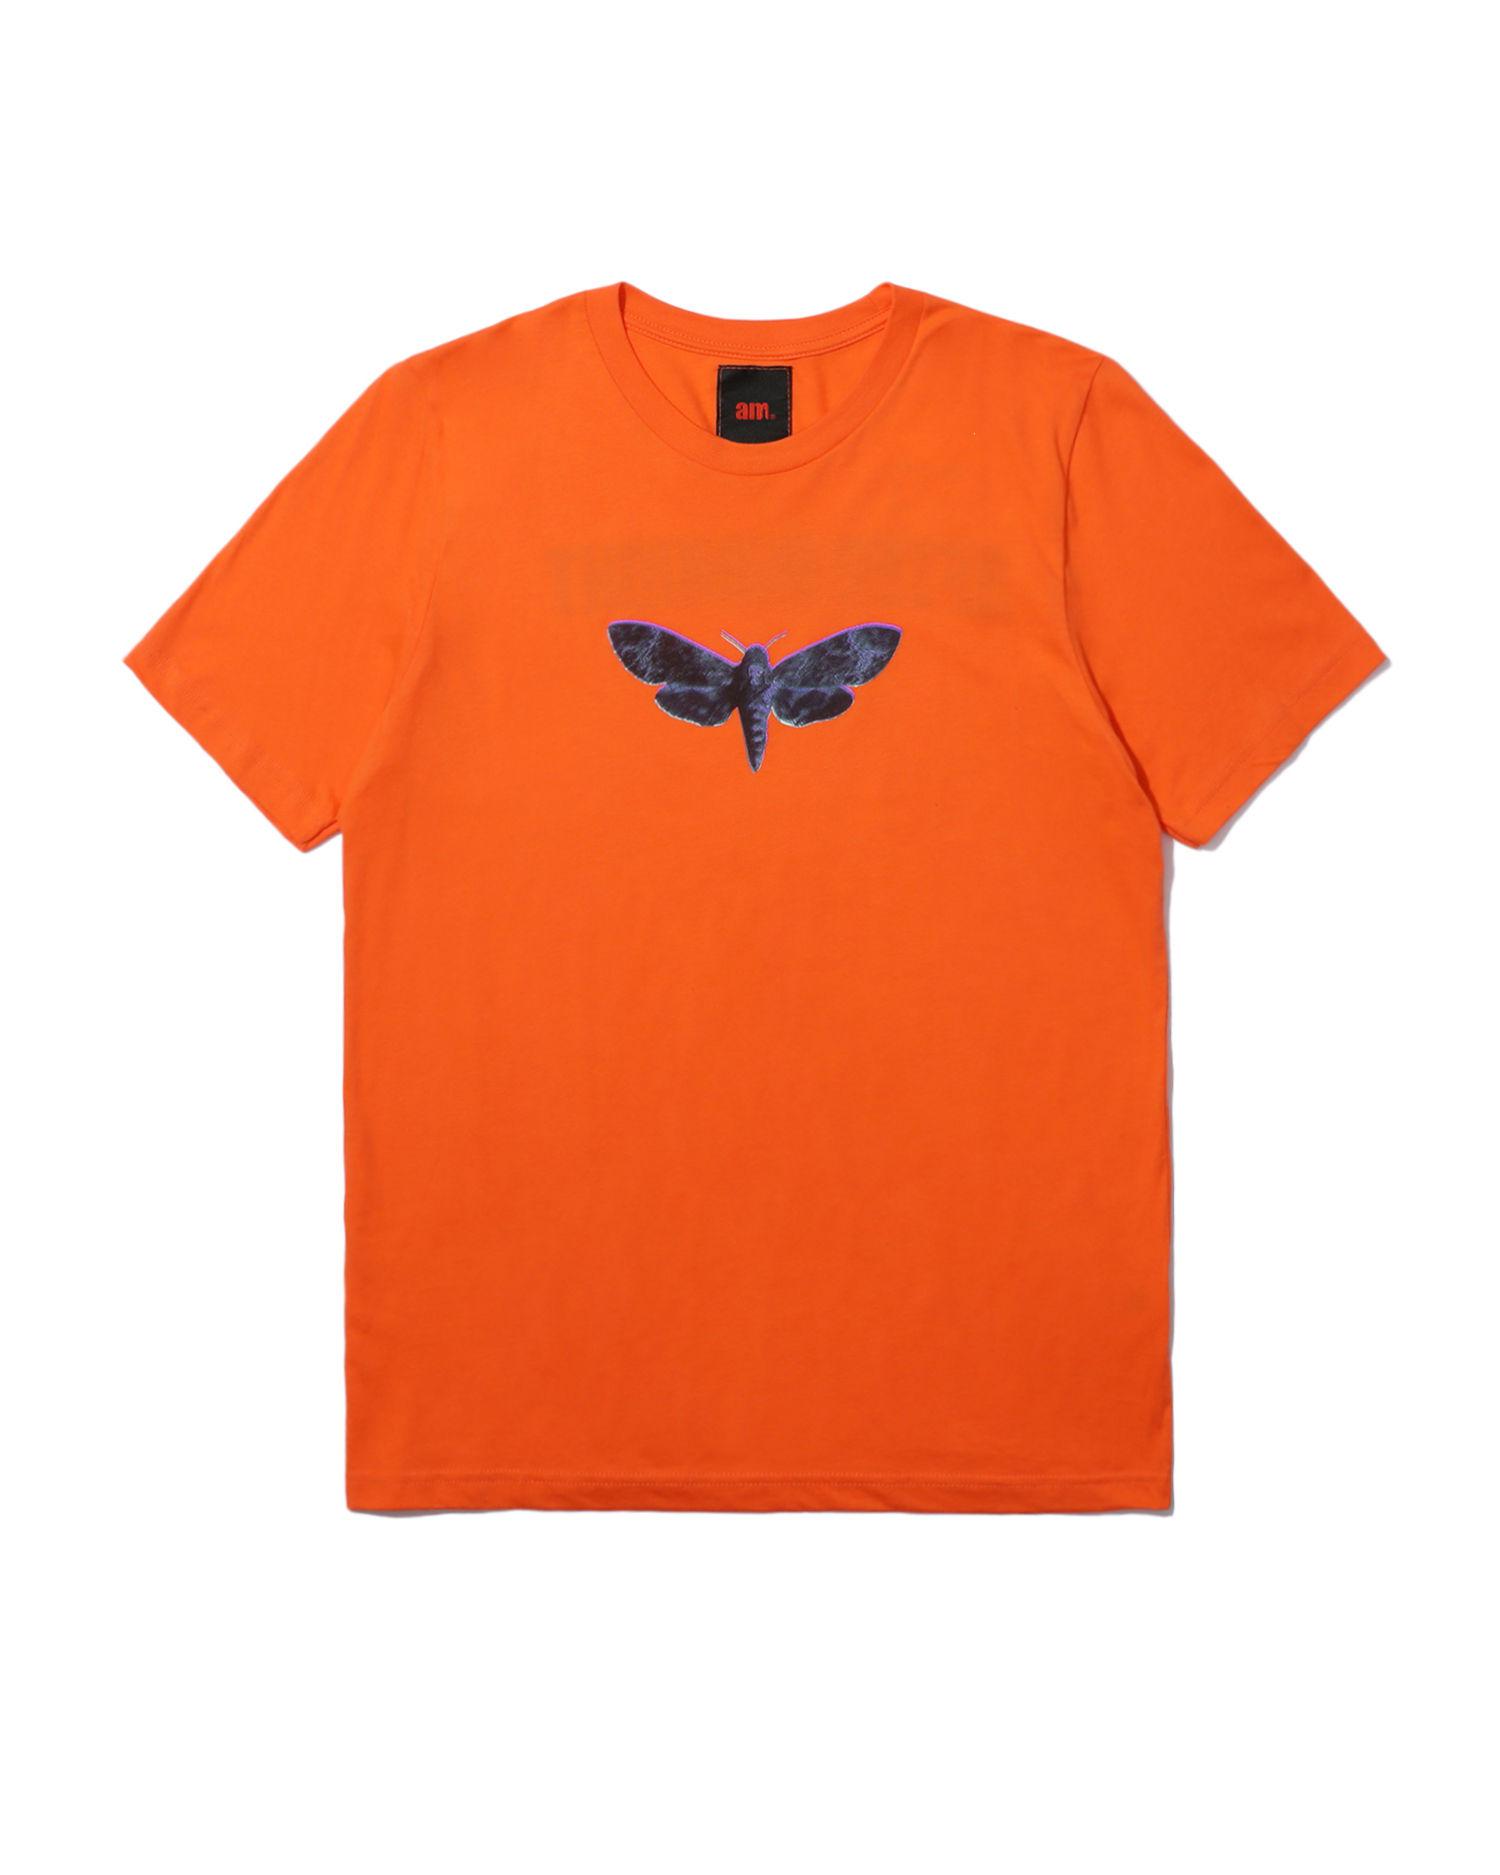 Moth tee by AFTER MIDNIGHT